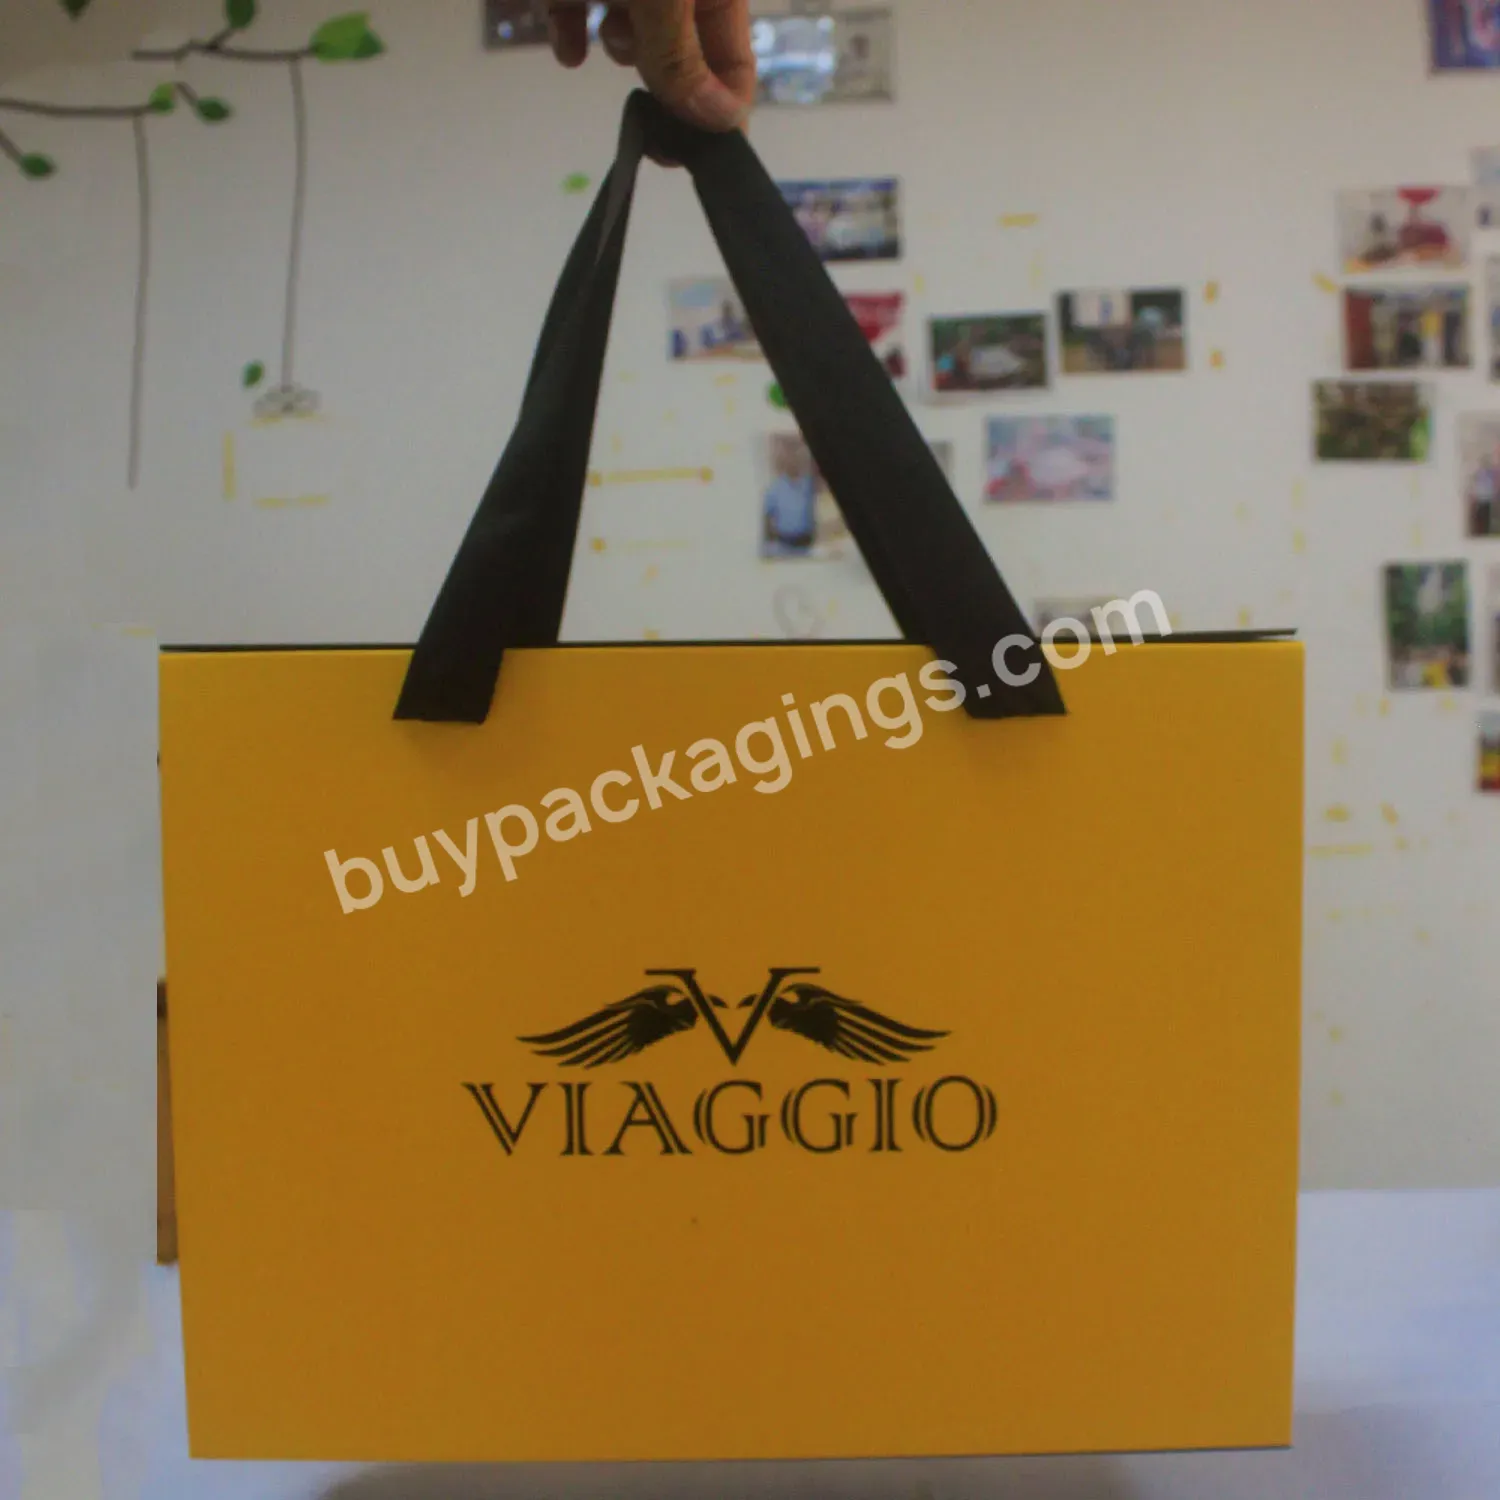 Free Design New Trendy Fashion Boxes Custom Brand Logo Luxury Yellow Shoe Clothing Storage Packaging Boxes With Handles